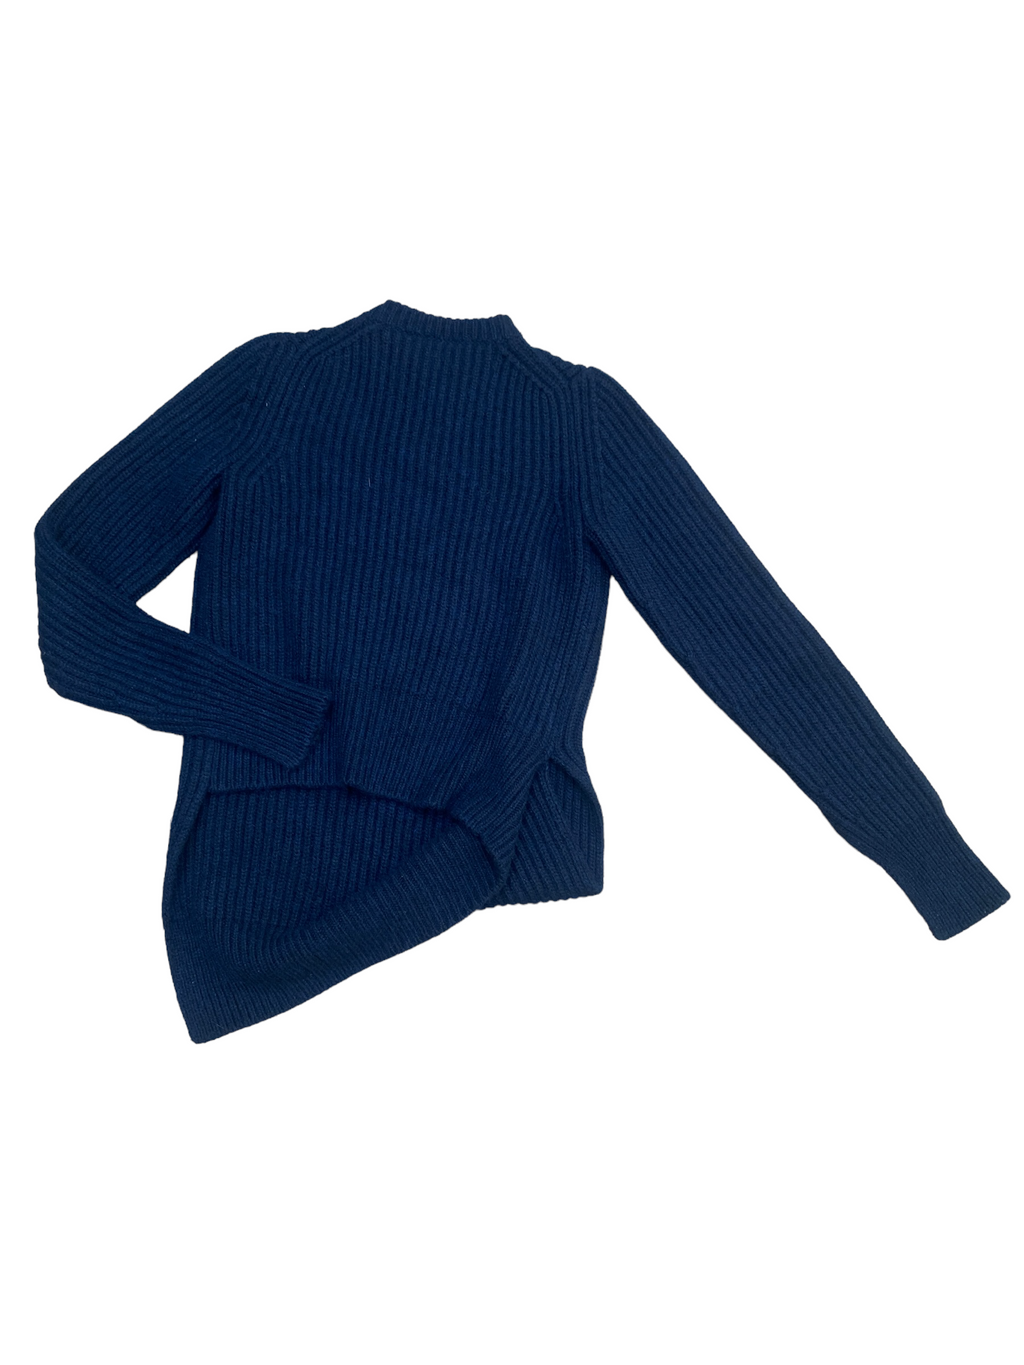 Navy Cashmere Twisted Sweater